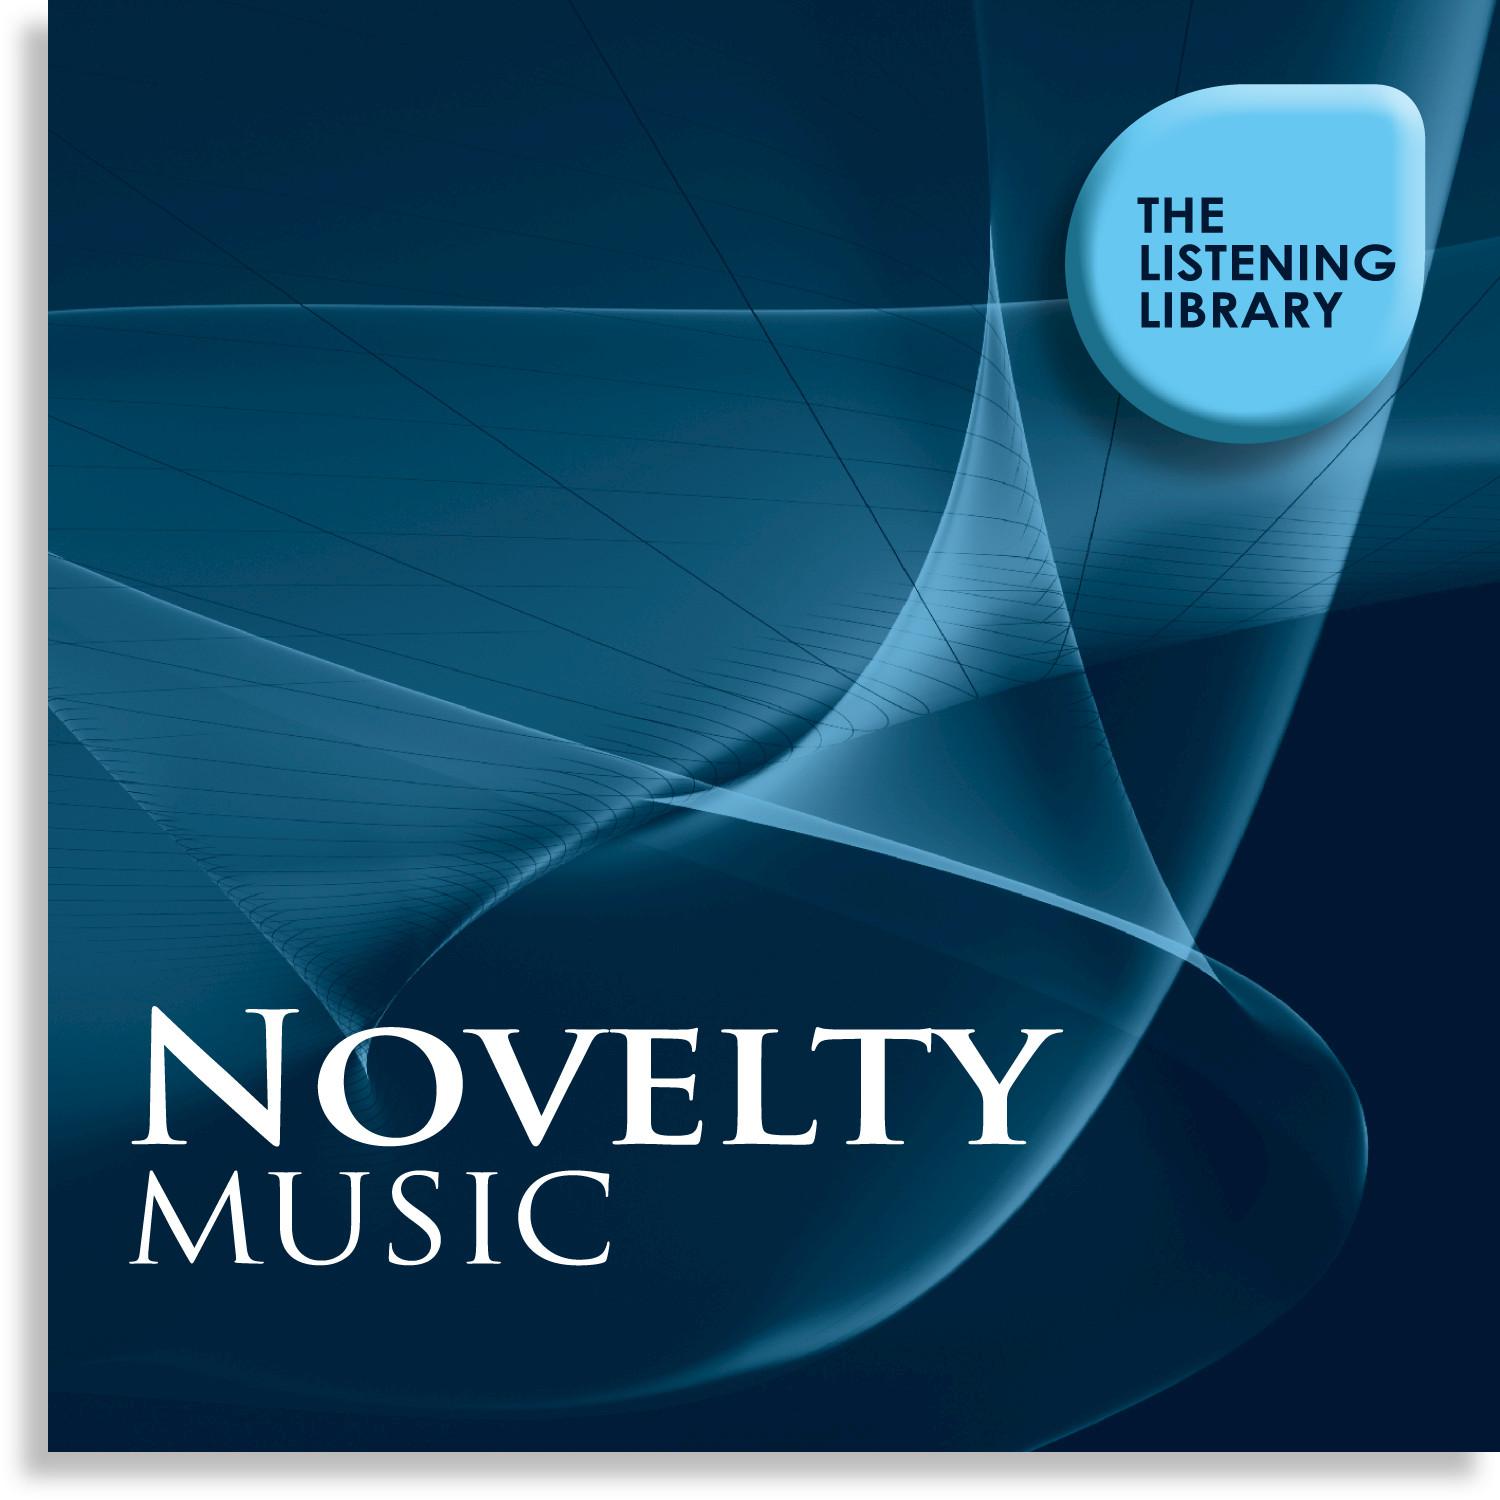 Novelty Music - The Listening Library